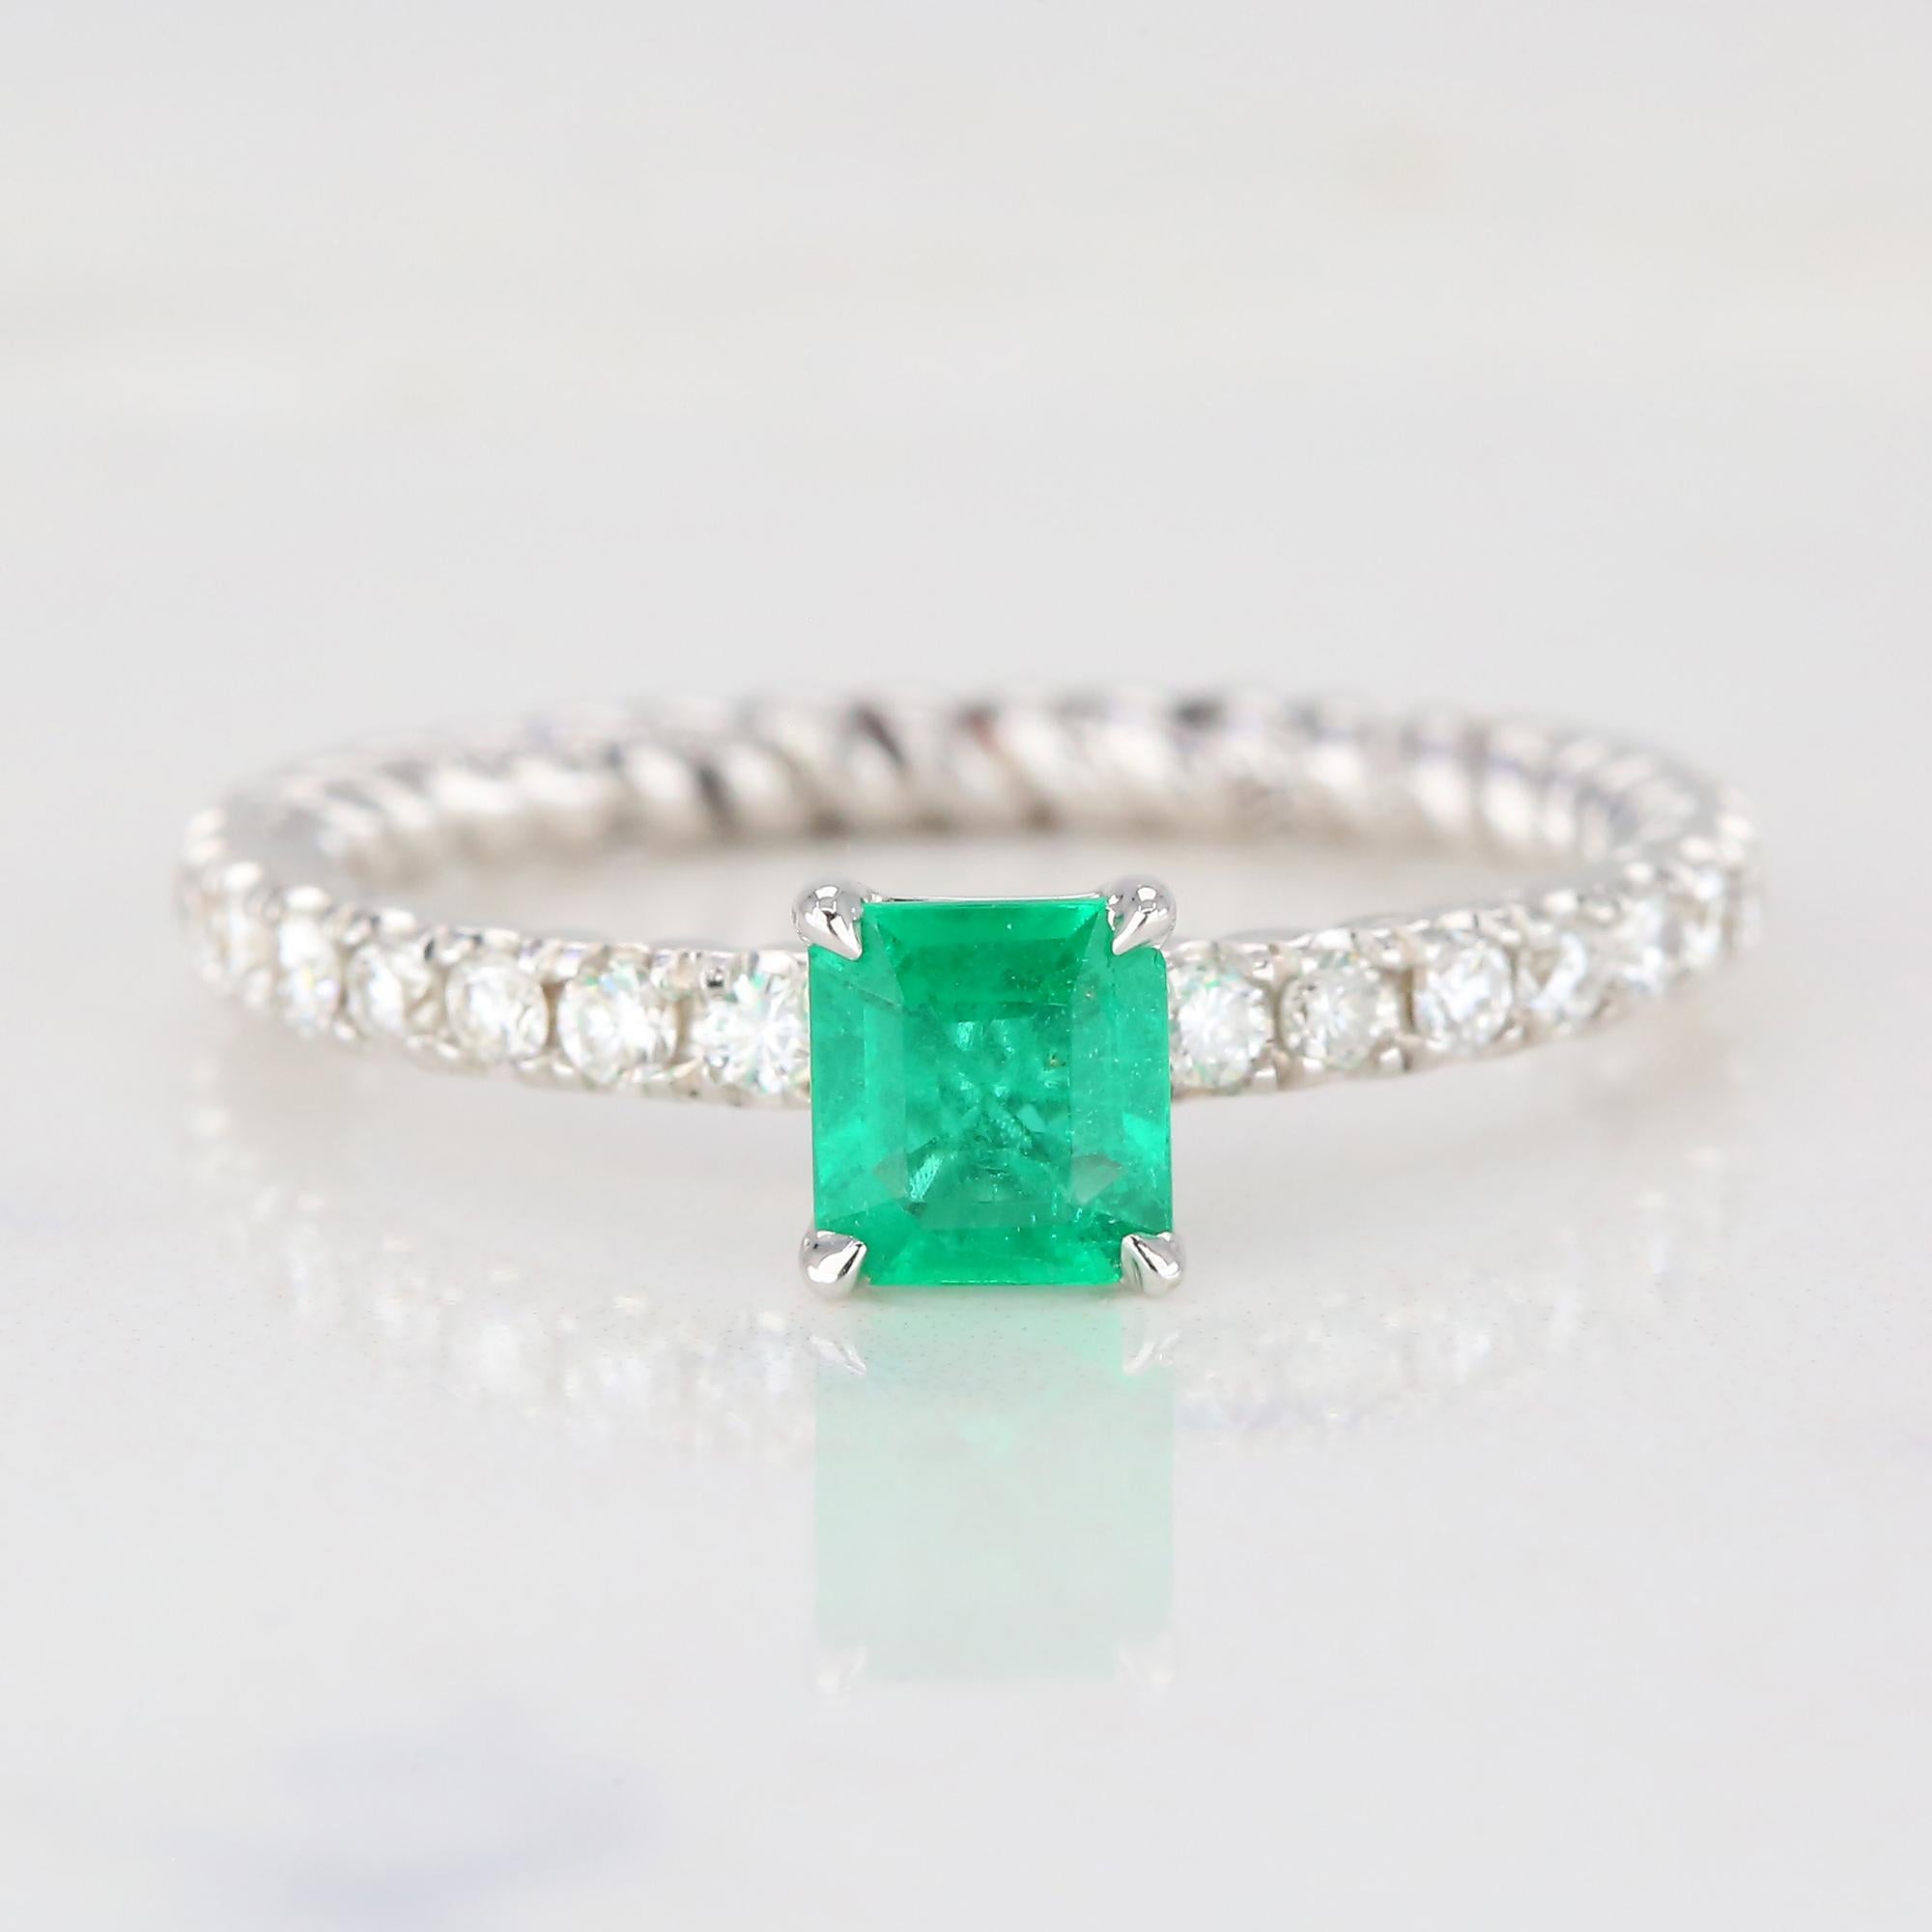 Emerald Dainty Ring, Emerald Cut Emerald Engagement And Dainty Ring With Pave Diamond Setting created by hands from ring to the stone shapes. Good ideas of engagement ring or dainty ring gift for her.

I used brillant diamonds pave setting to reveal